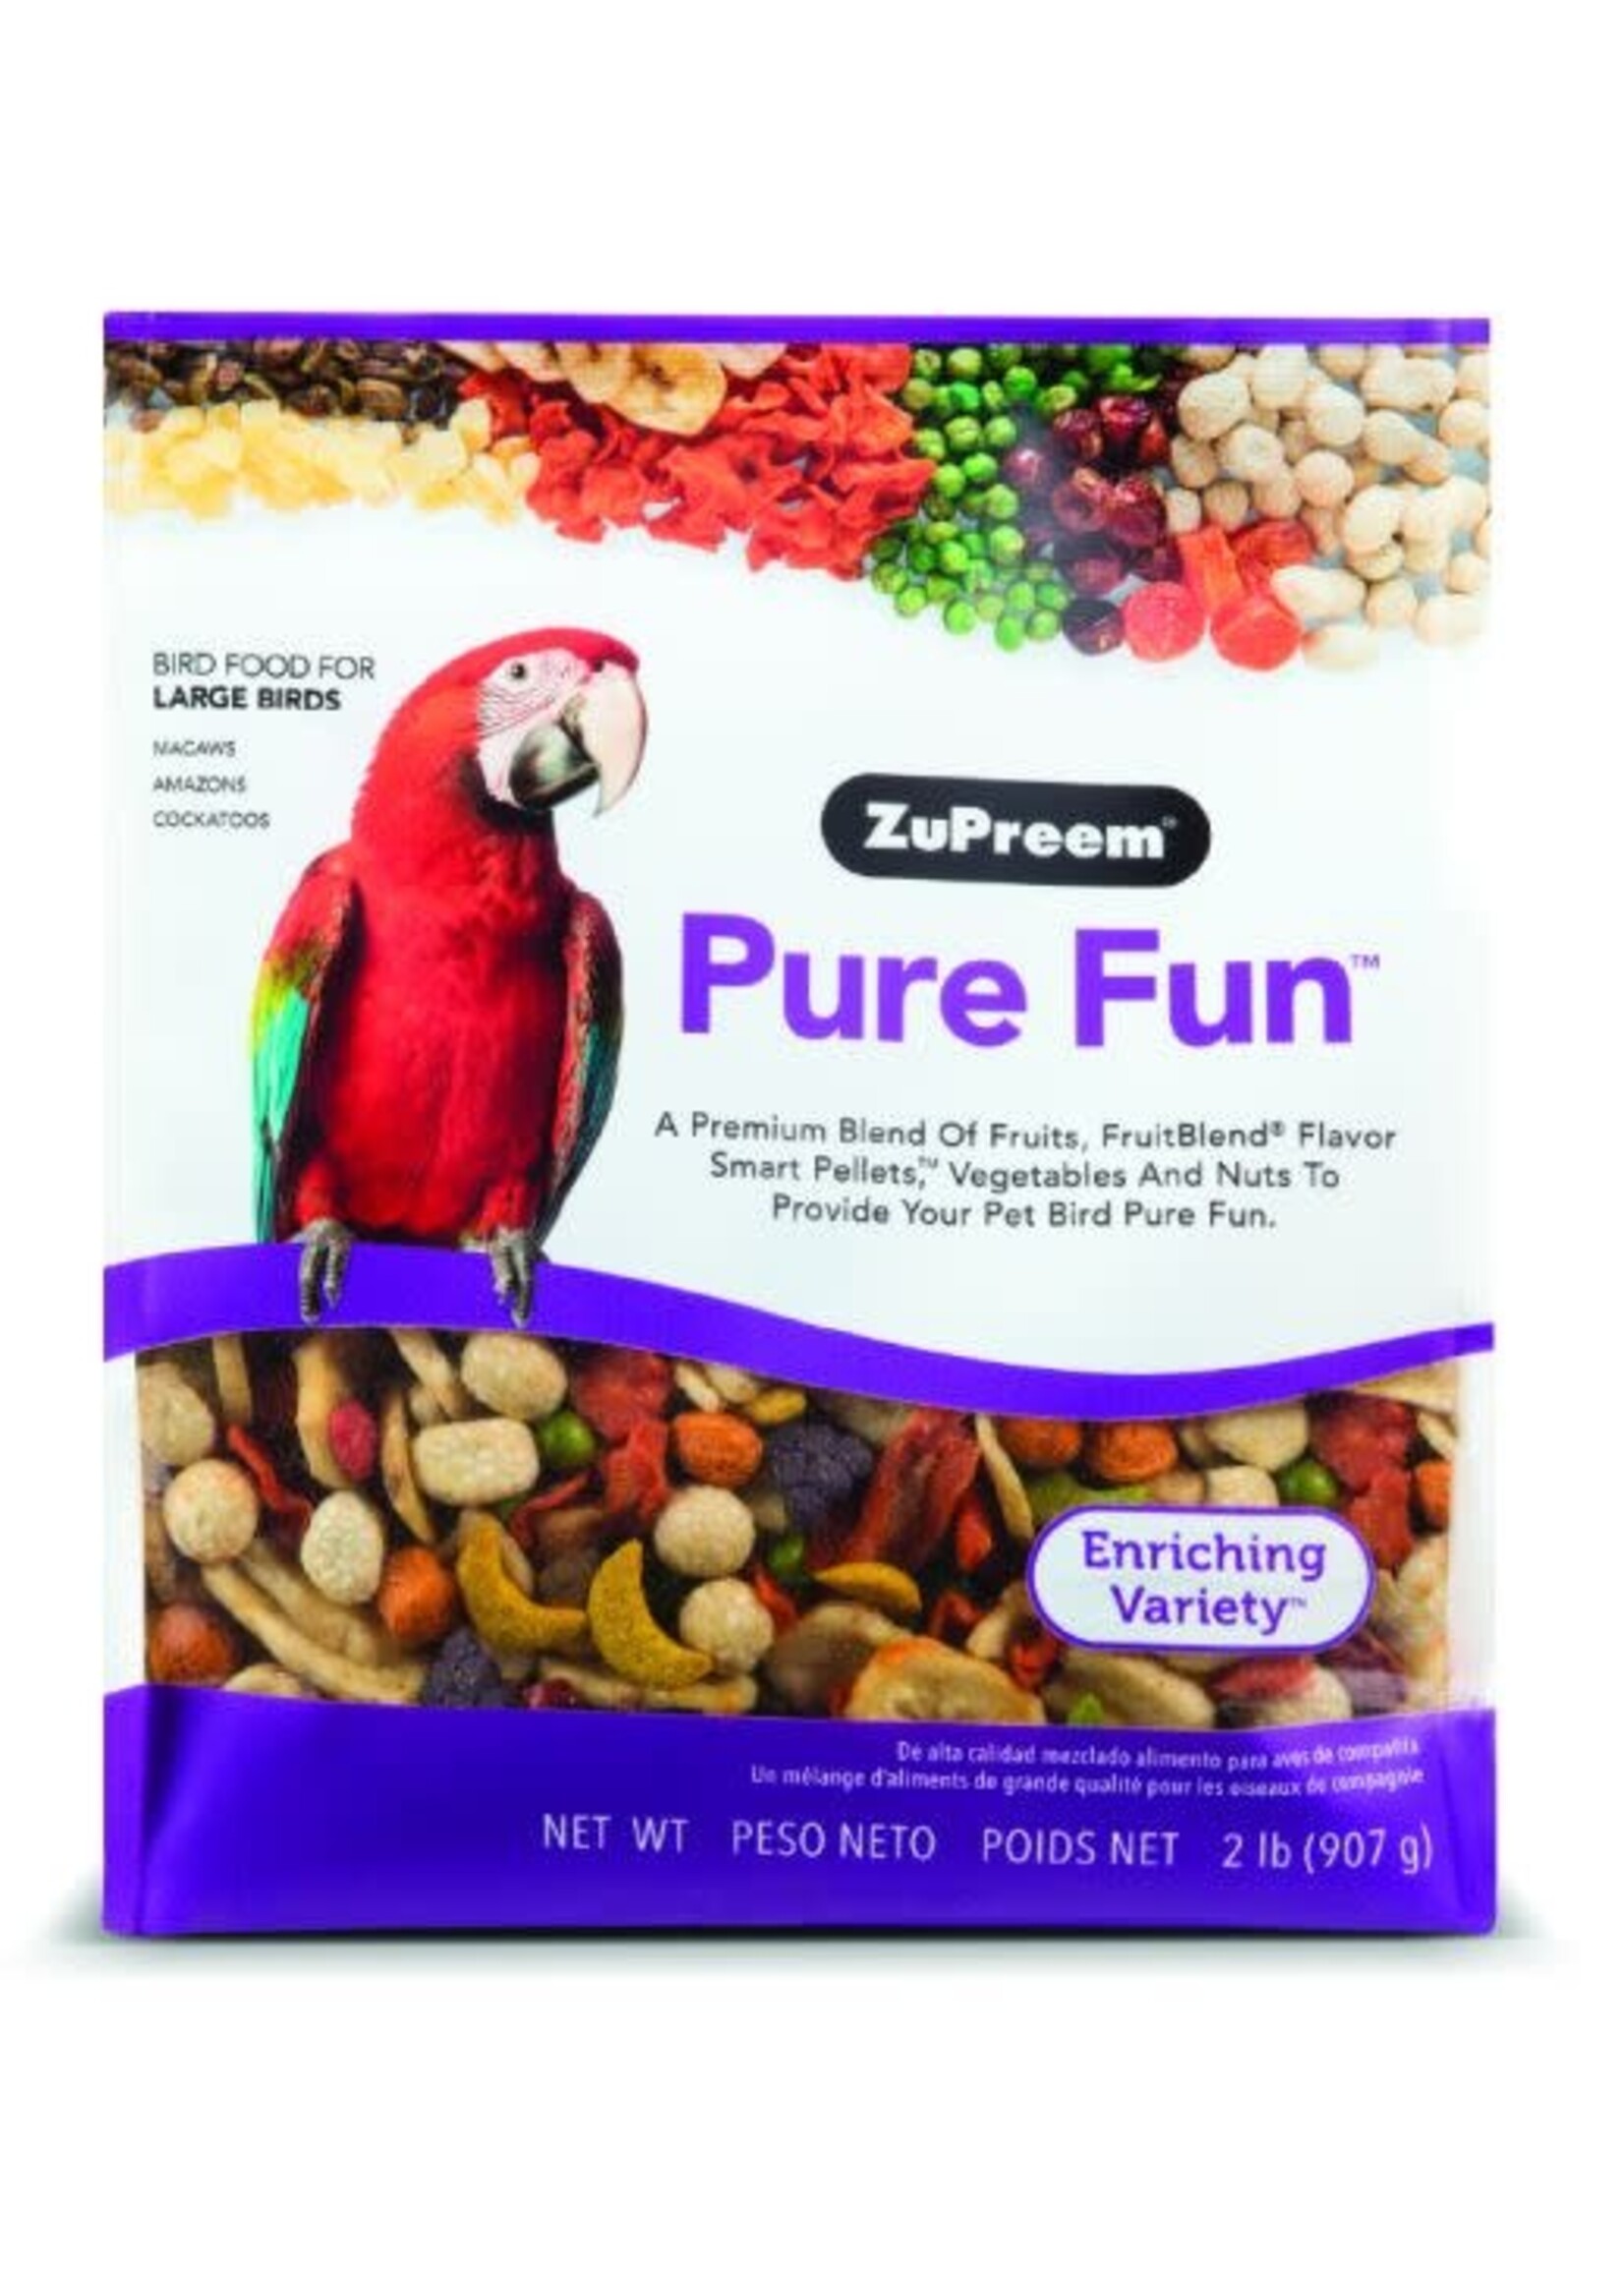 Zupreem ZuPreem "Pure Fun" Food For Macaws, Parrots, Cockatoos & Other Large Birds 2lbs 38020